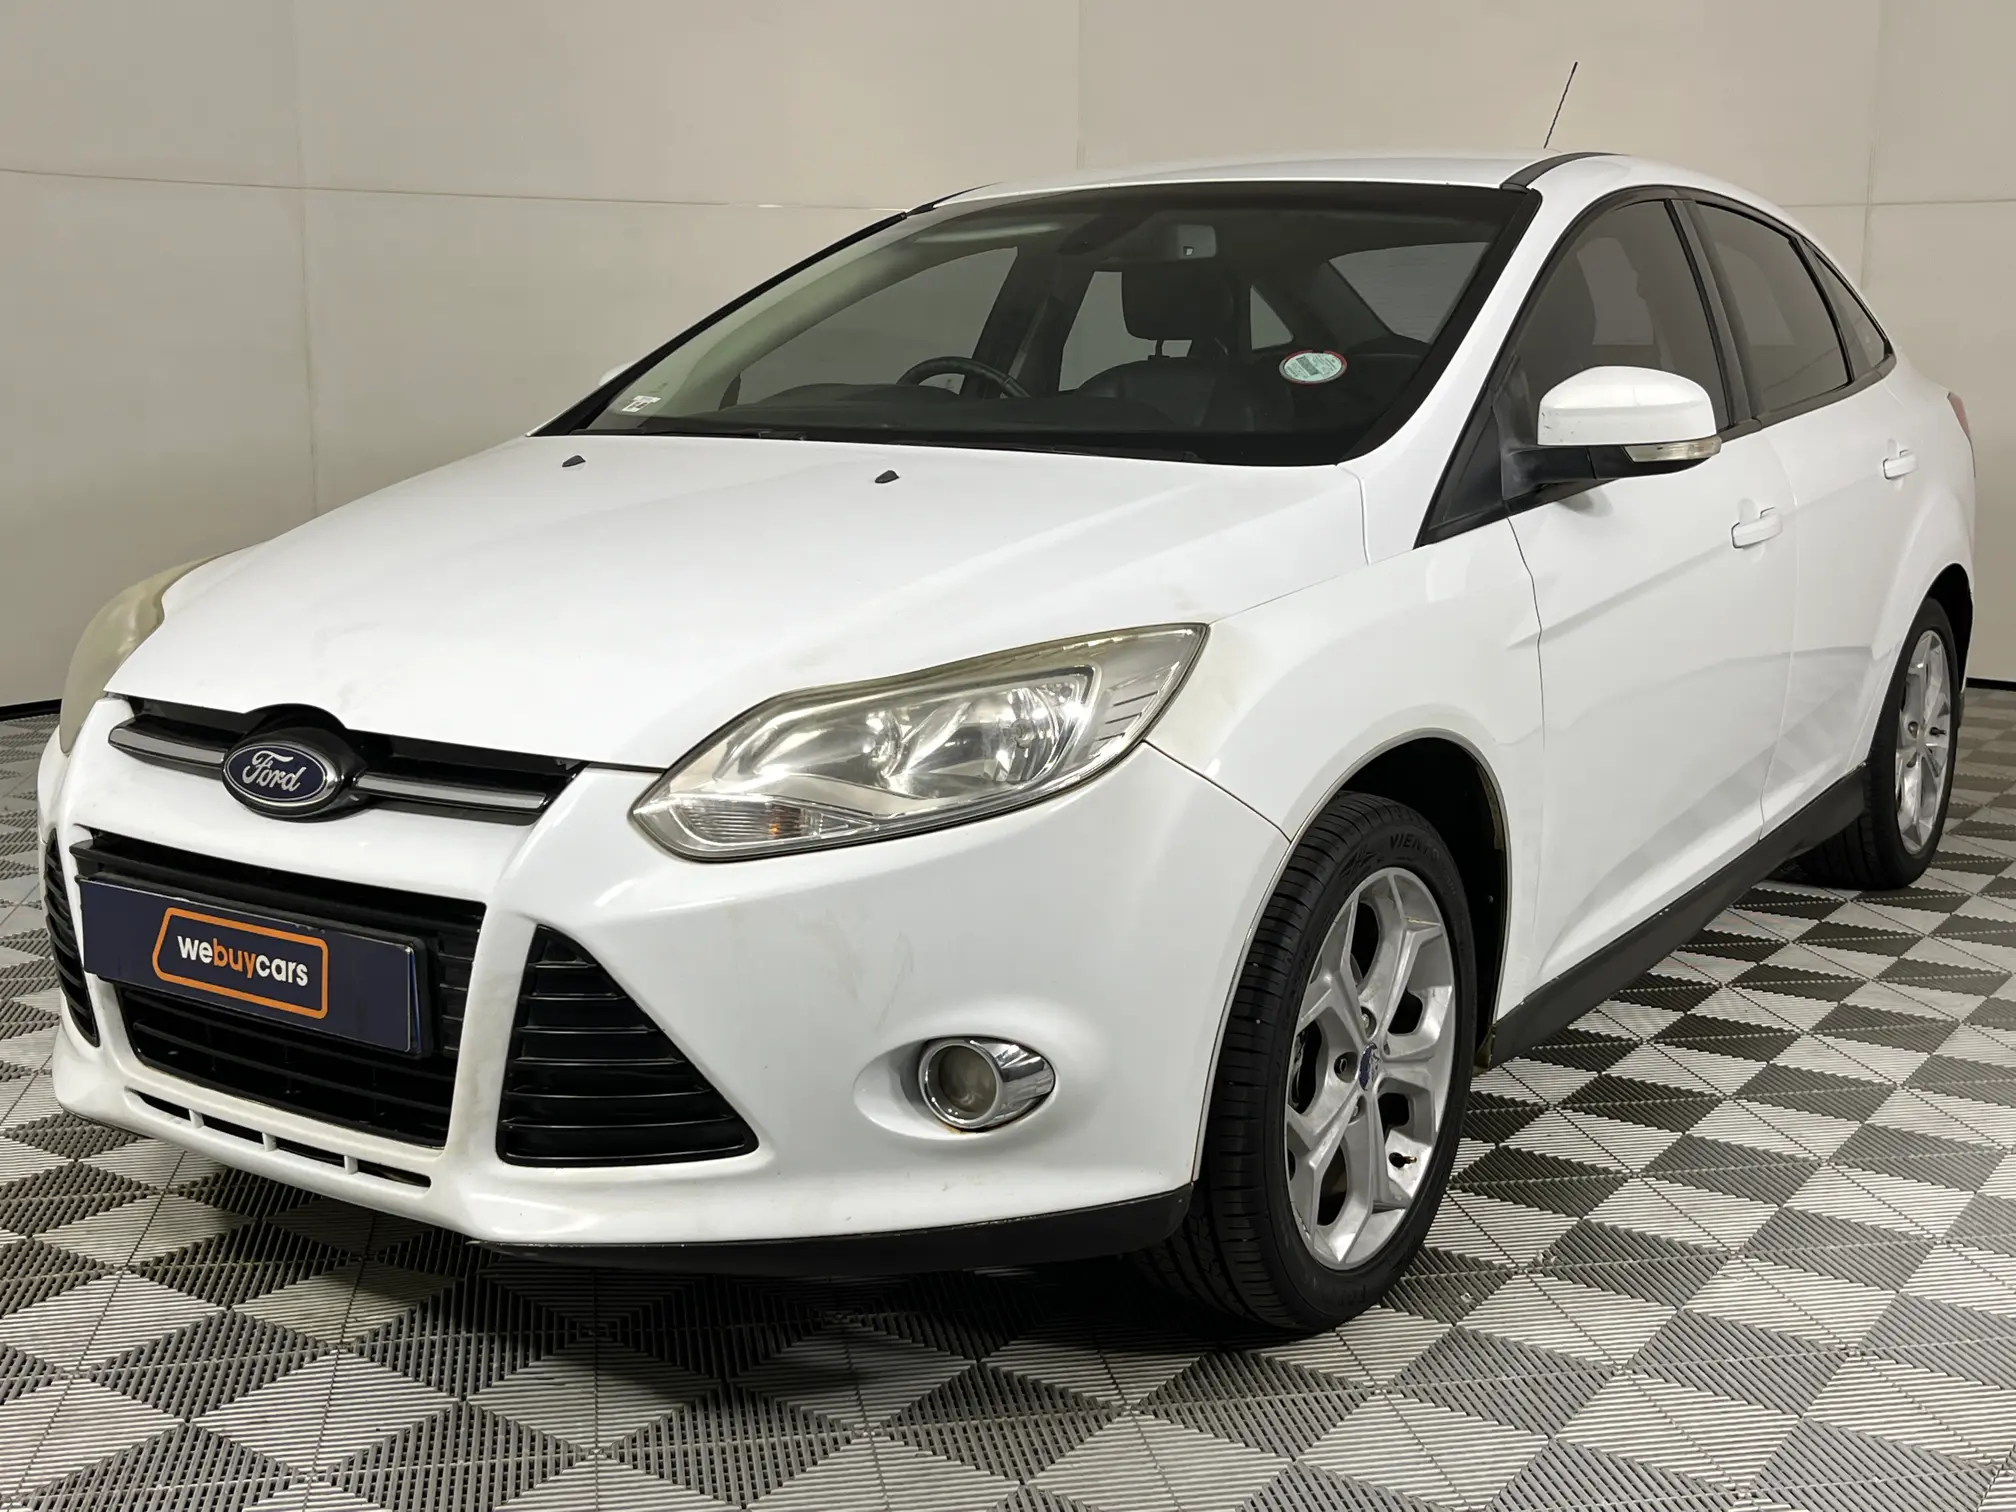 2013 Ford Focus 1.6 TI VCT Trend